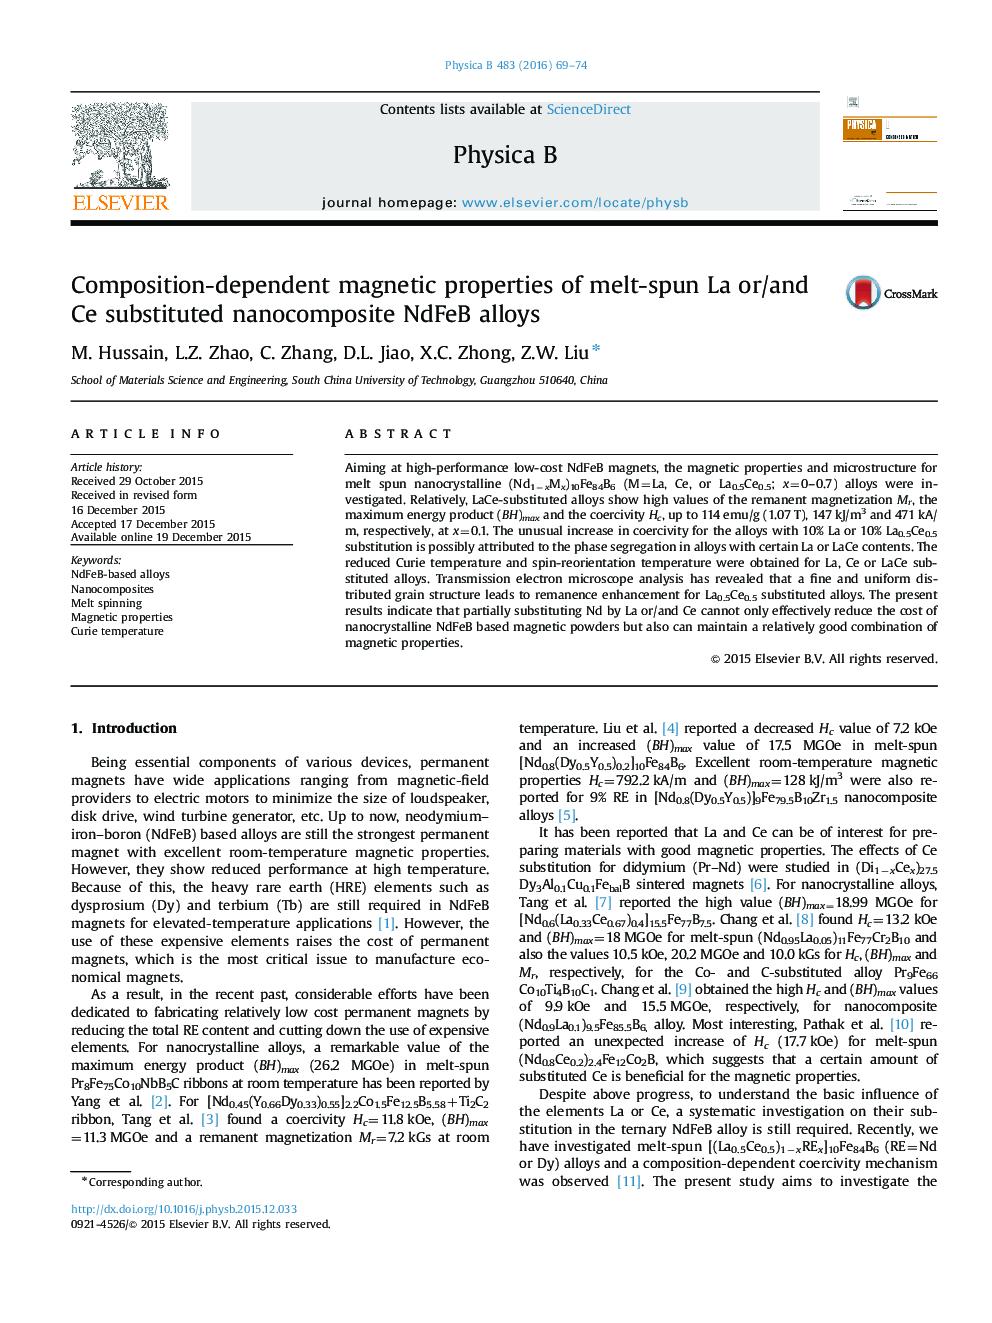 Composition-dependent magnetic properties of melt-spun La or/and Ce substituted nanocomposite NdFeB alloys